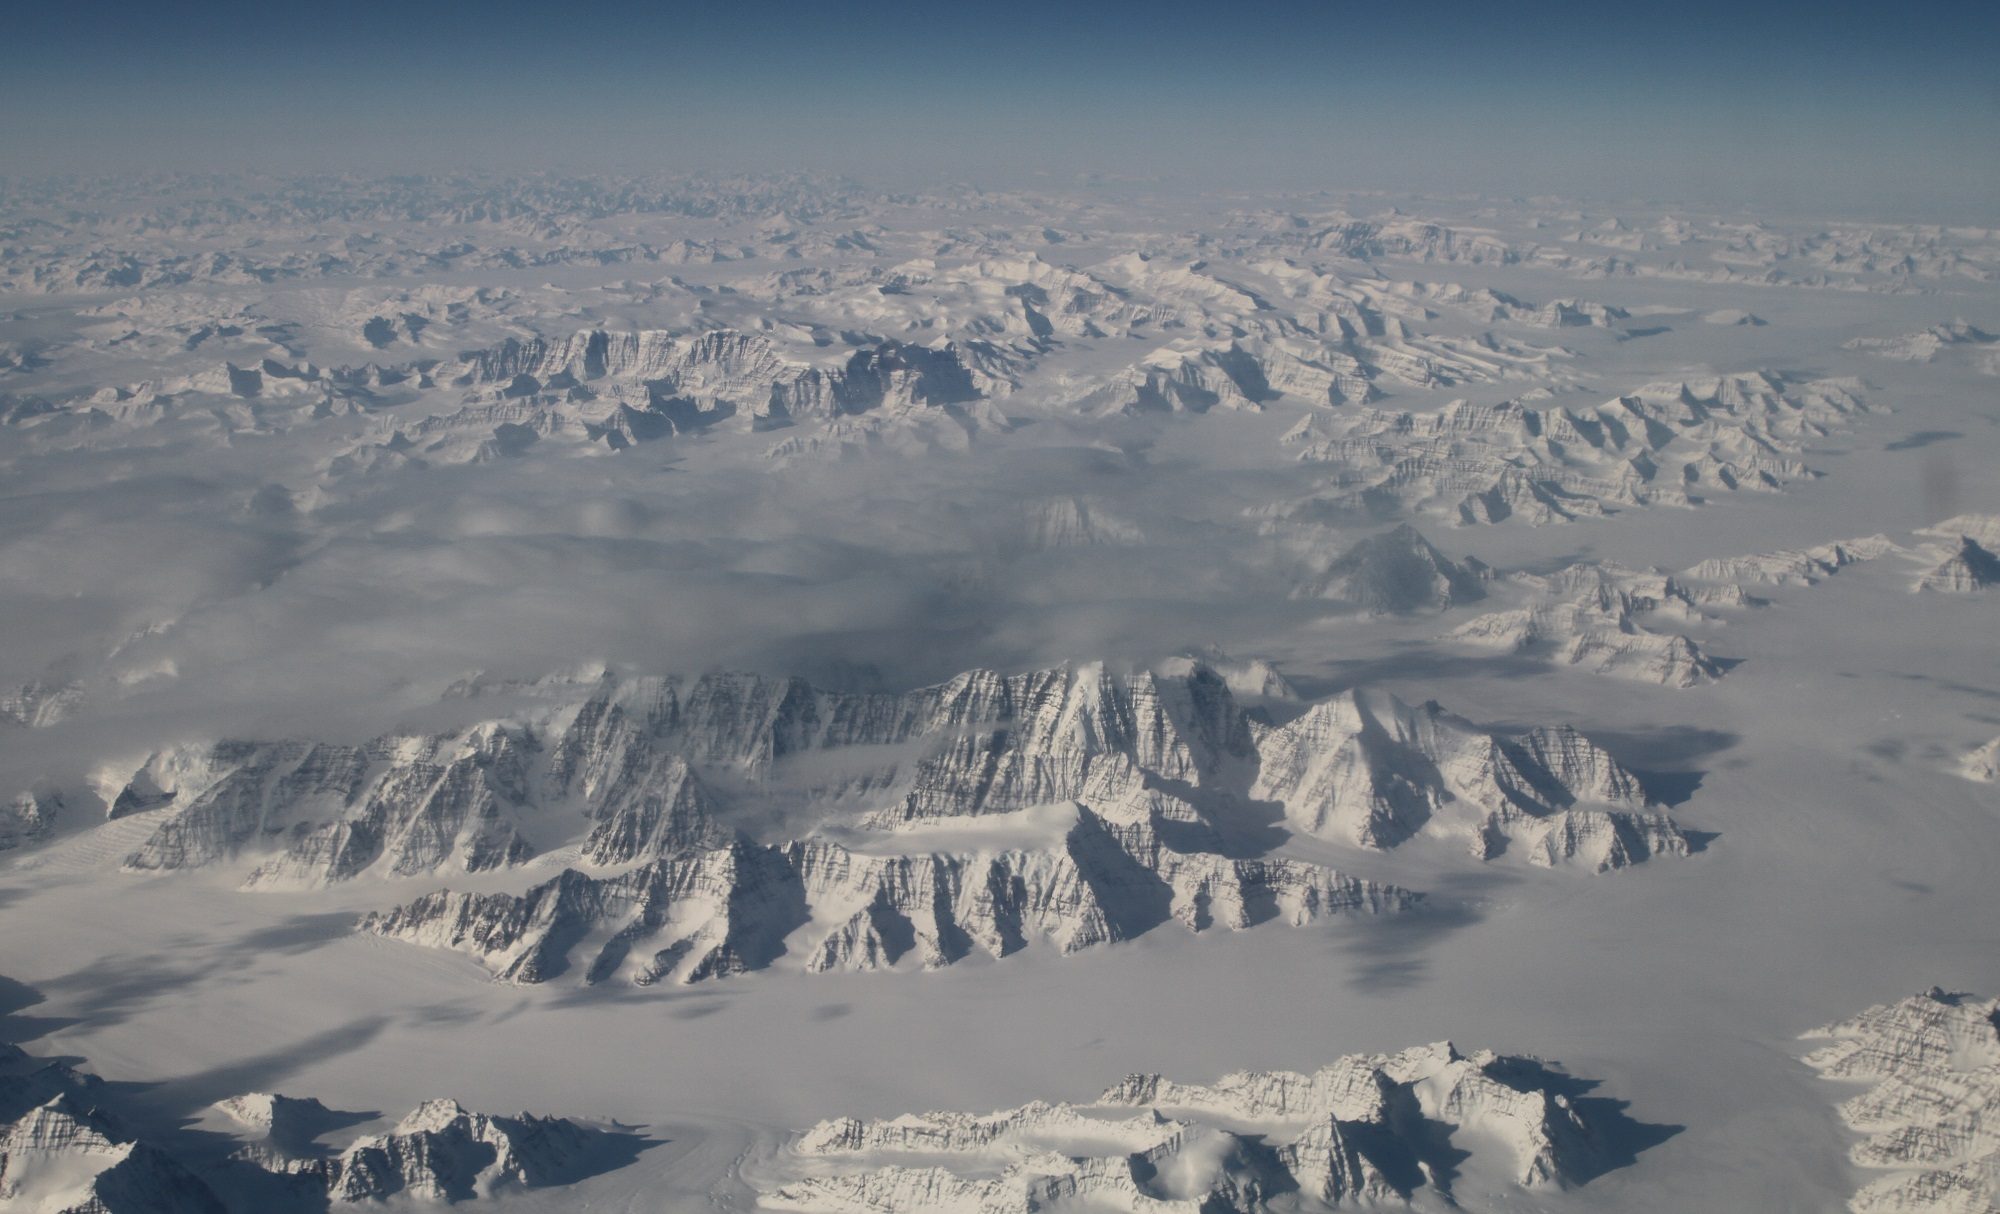 Greenland sees record early melting of ice sheet